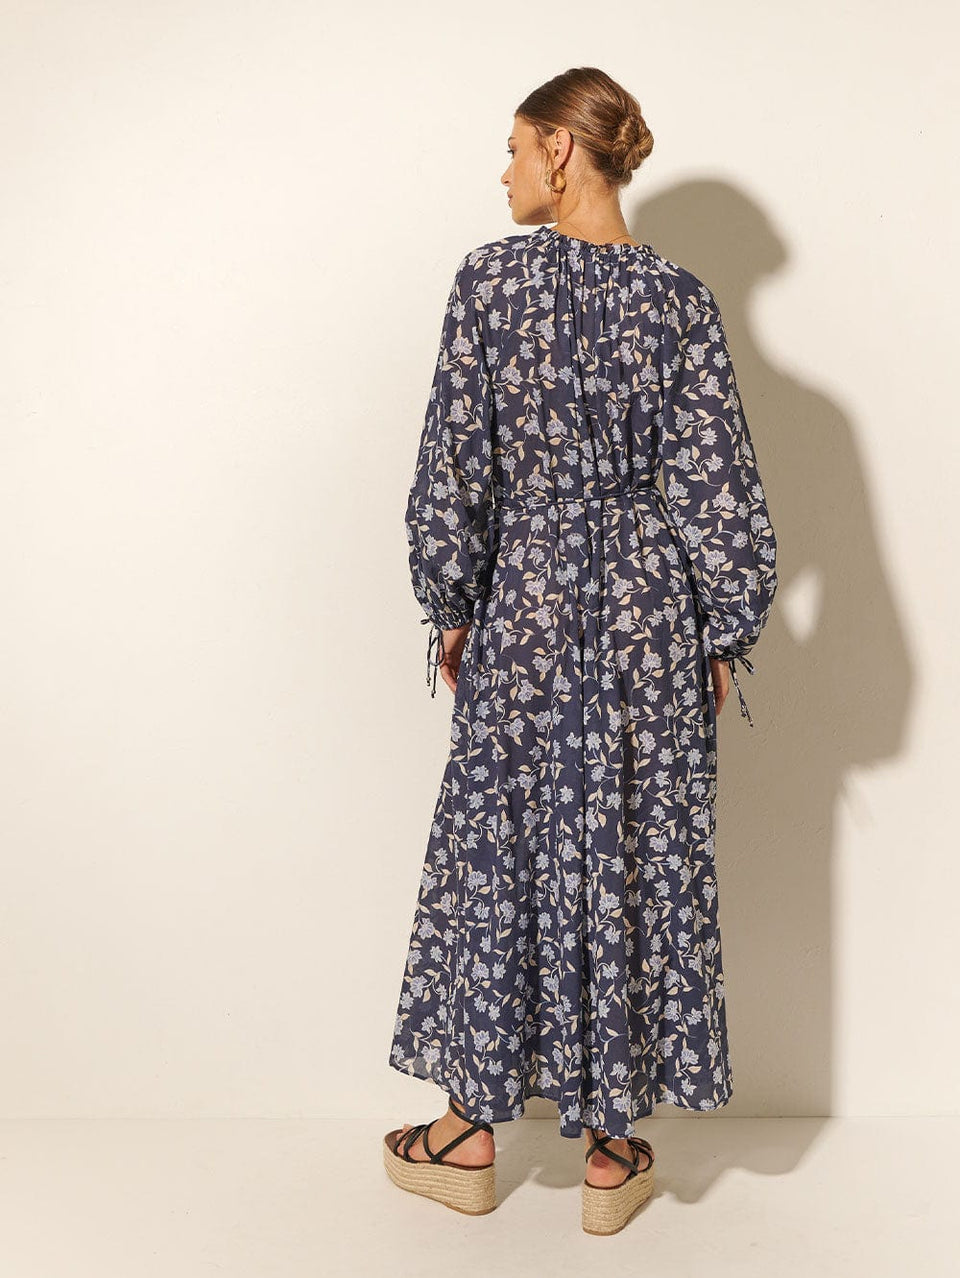 Back shot: Studio model wears KIVARI Jeanne Maxi Dress: A navy and sky blue floral dress made from cotton and featuring a button front, waist tie, full-length blouson sleeves and frill collar detail.